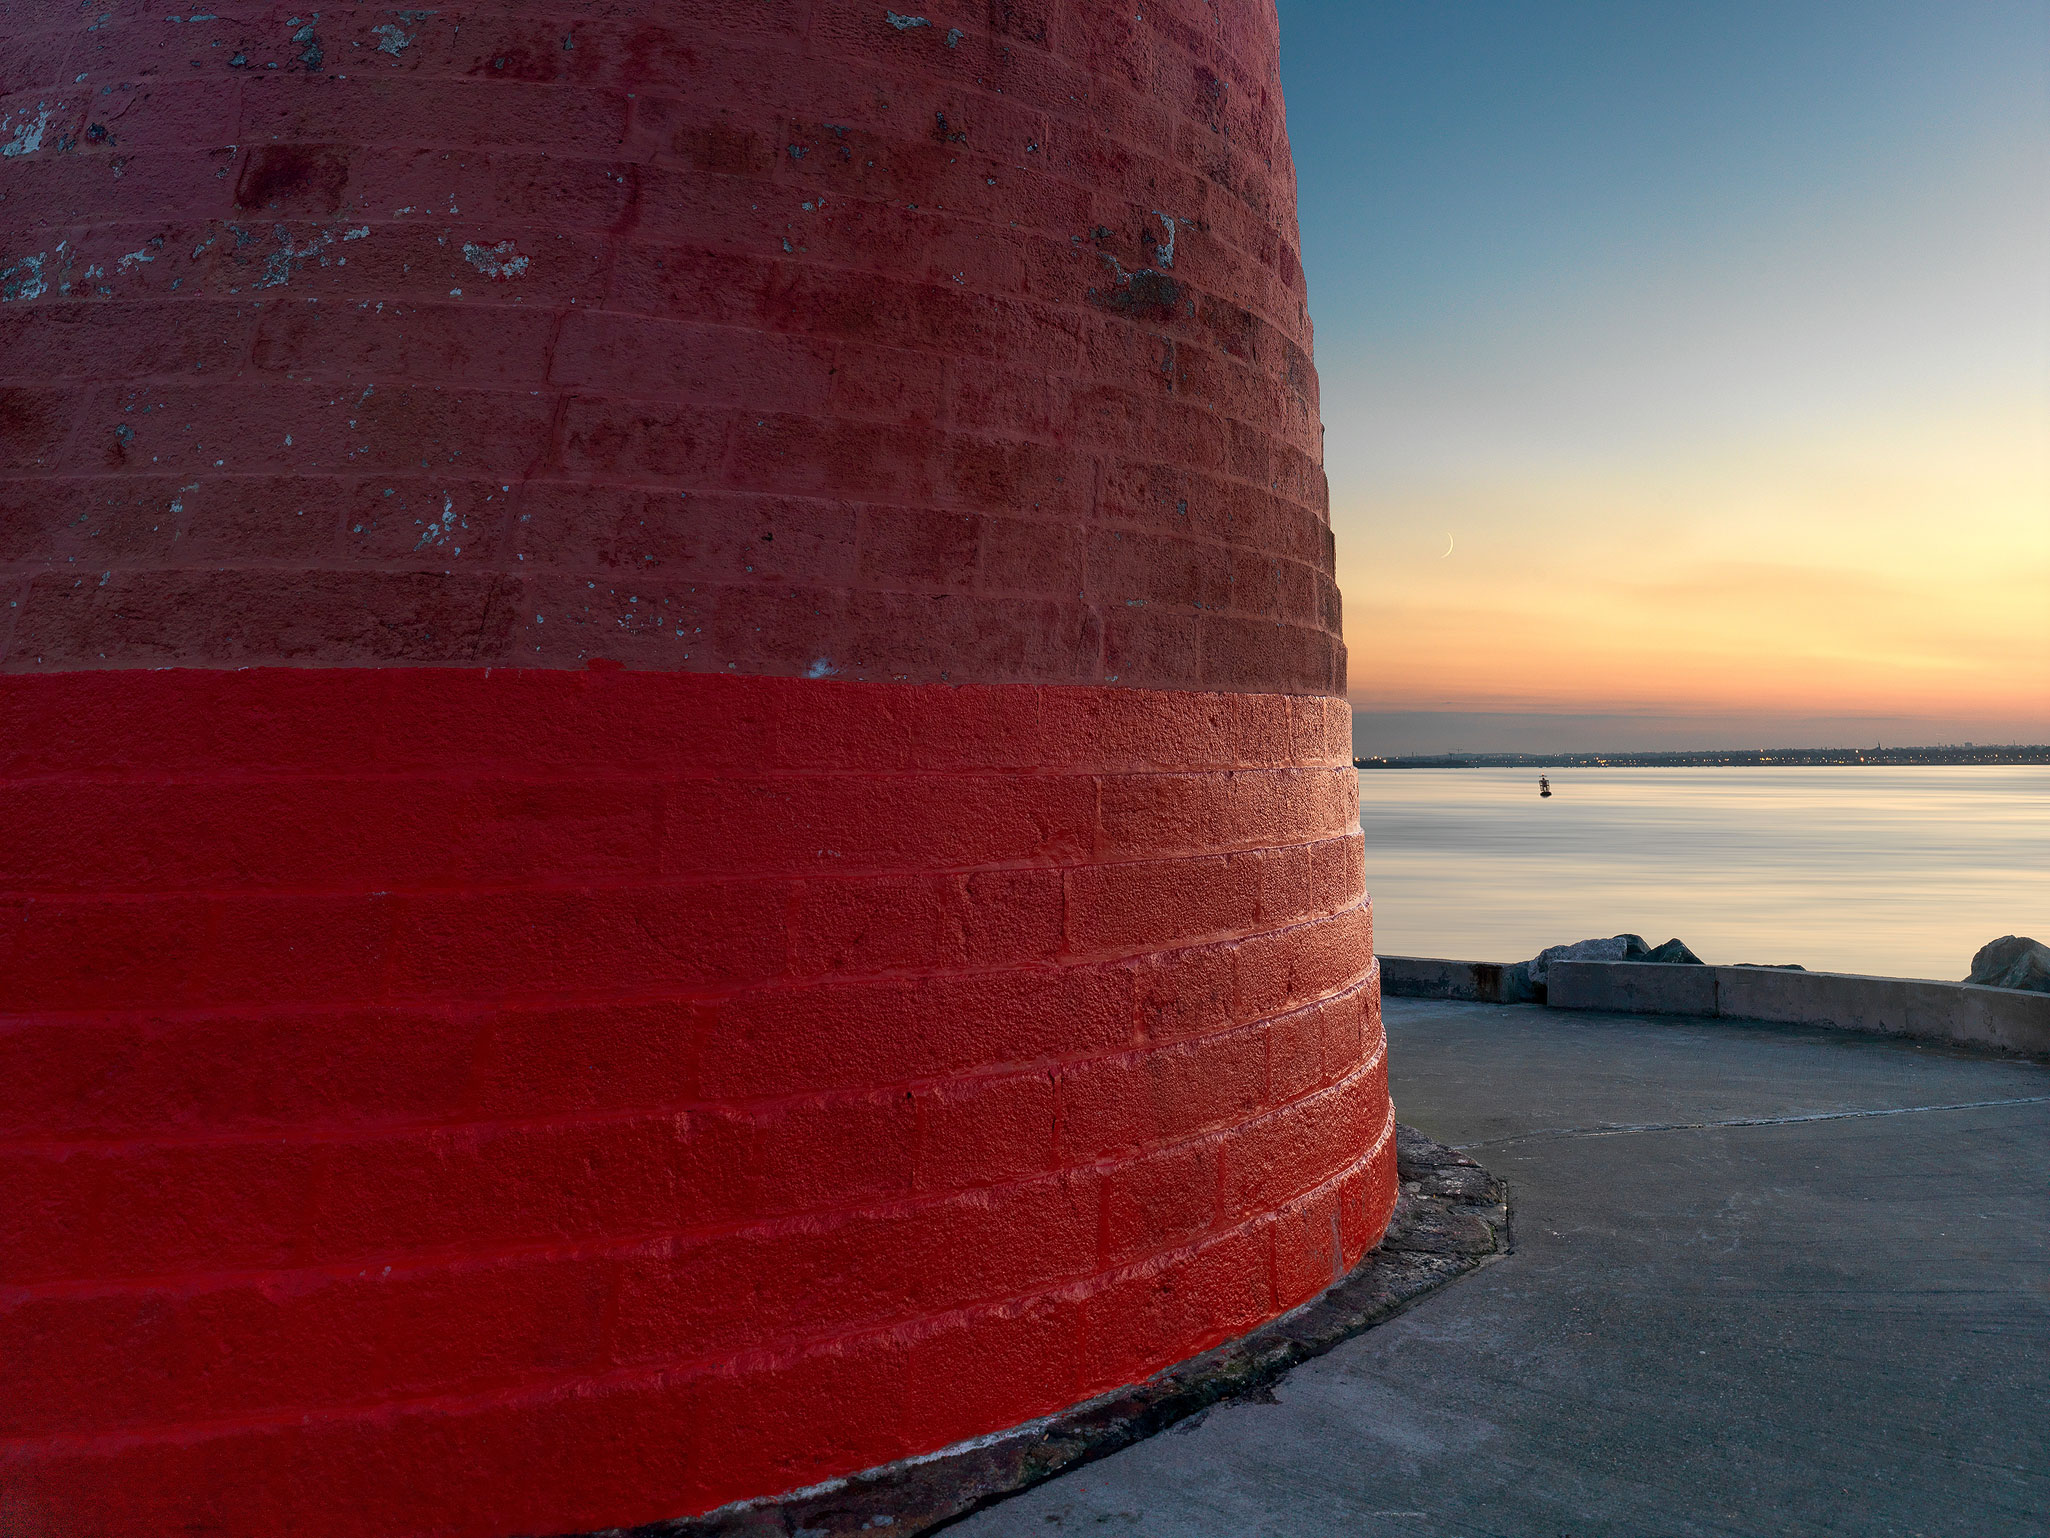 Poolbeg Lighthouse South Wall ringsend